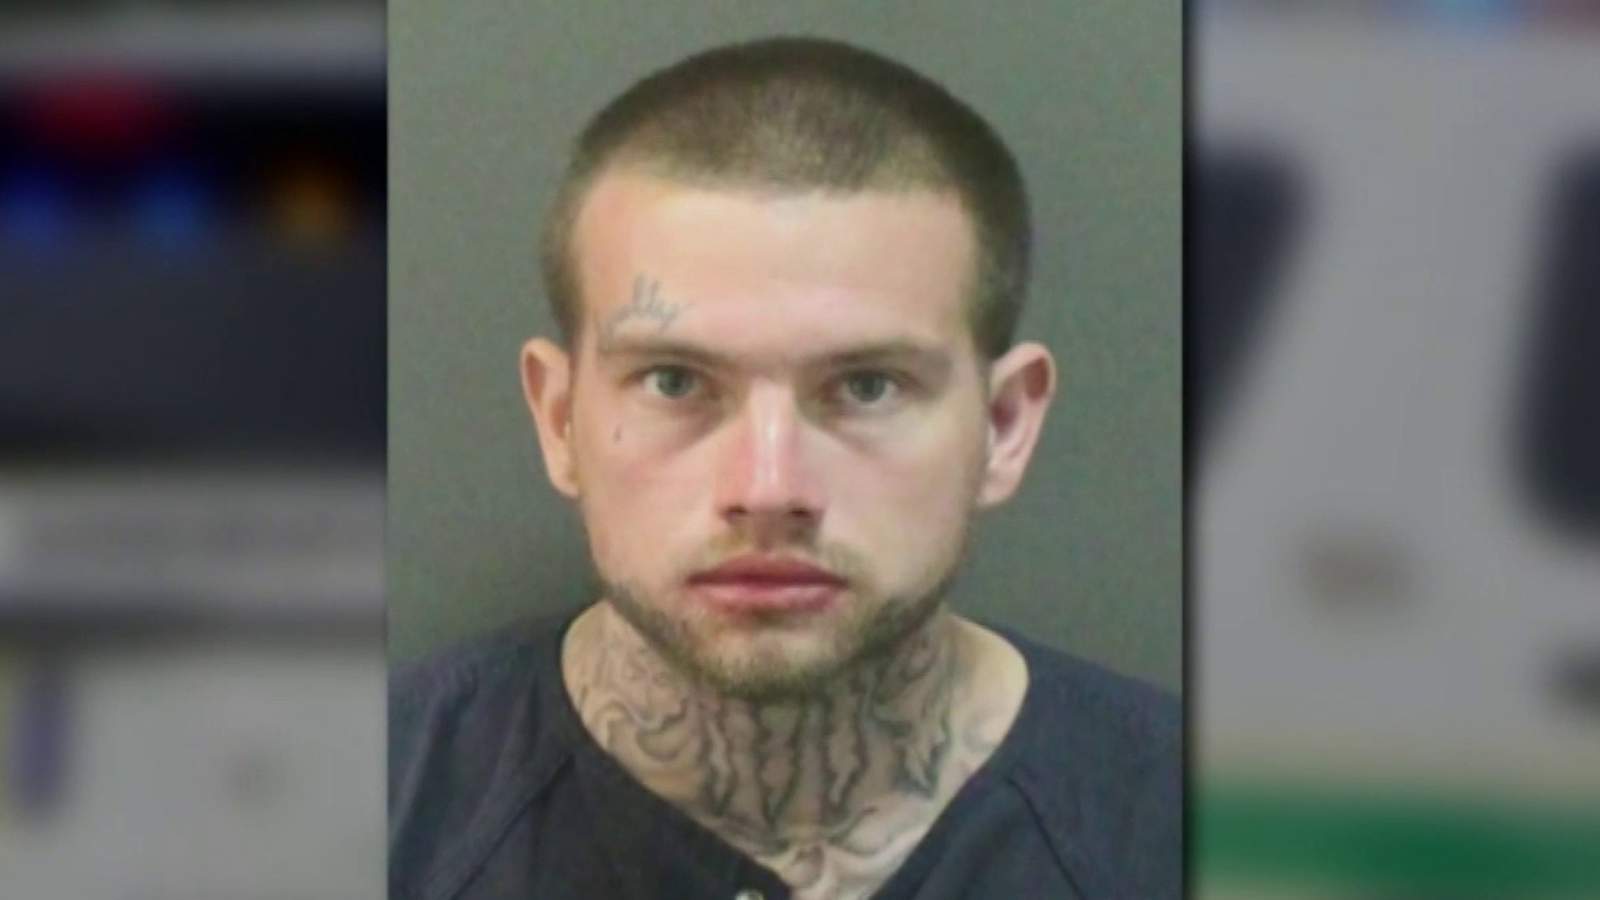 Inmate attacks officer, crashes stolen vehicle in Lake County, deputies say